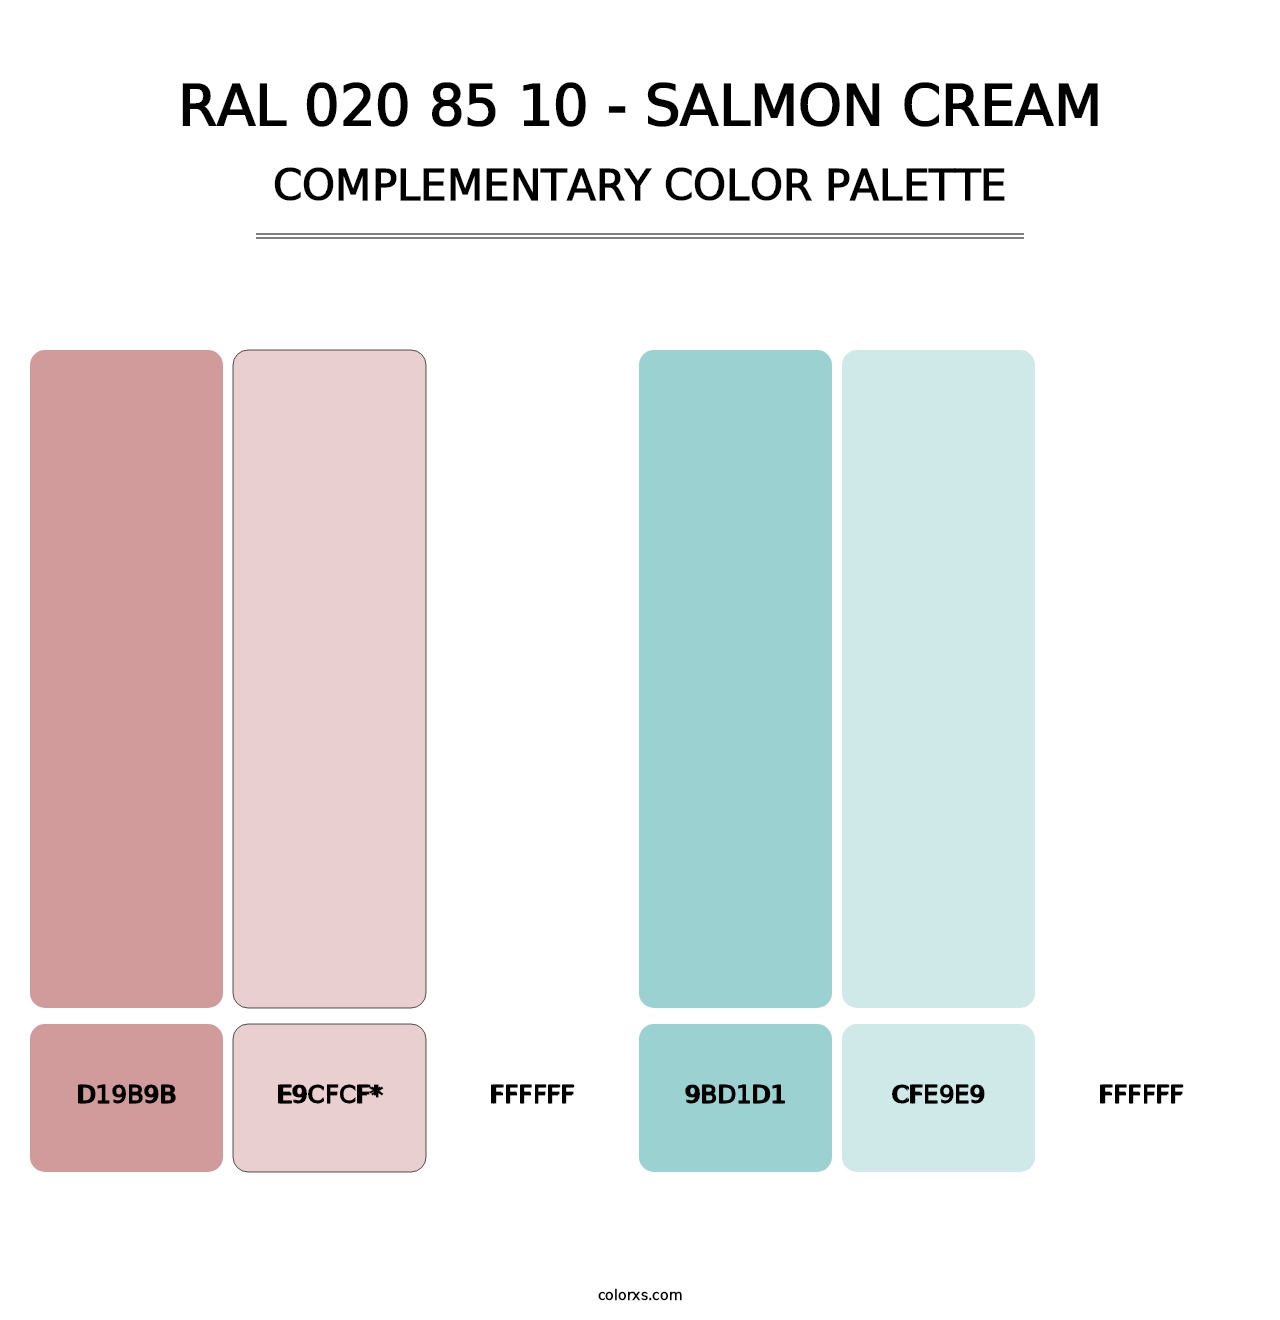 RAL 020 85 10 - Salmon Cream - Complementary Color Palette